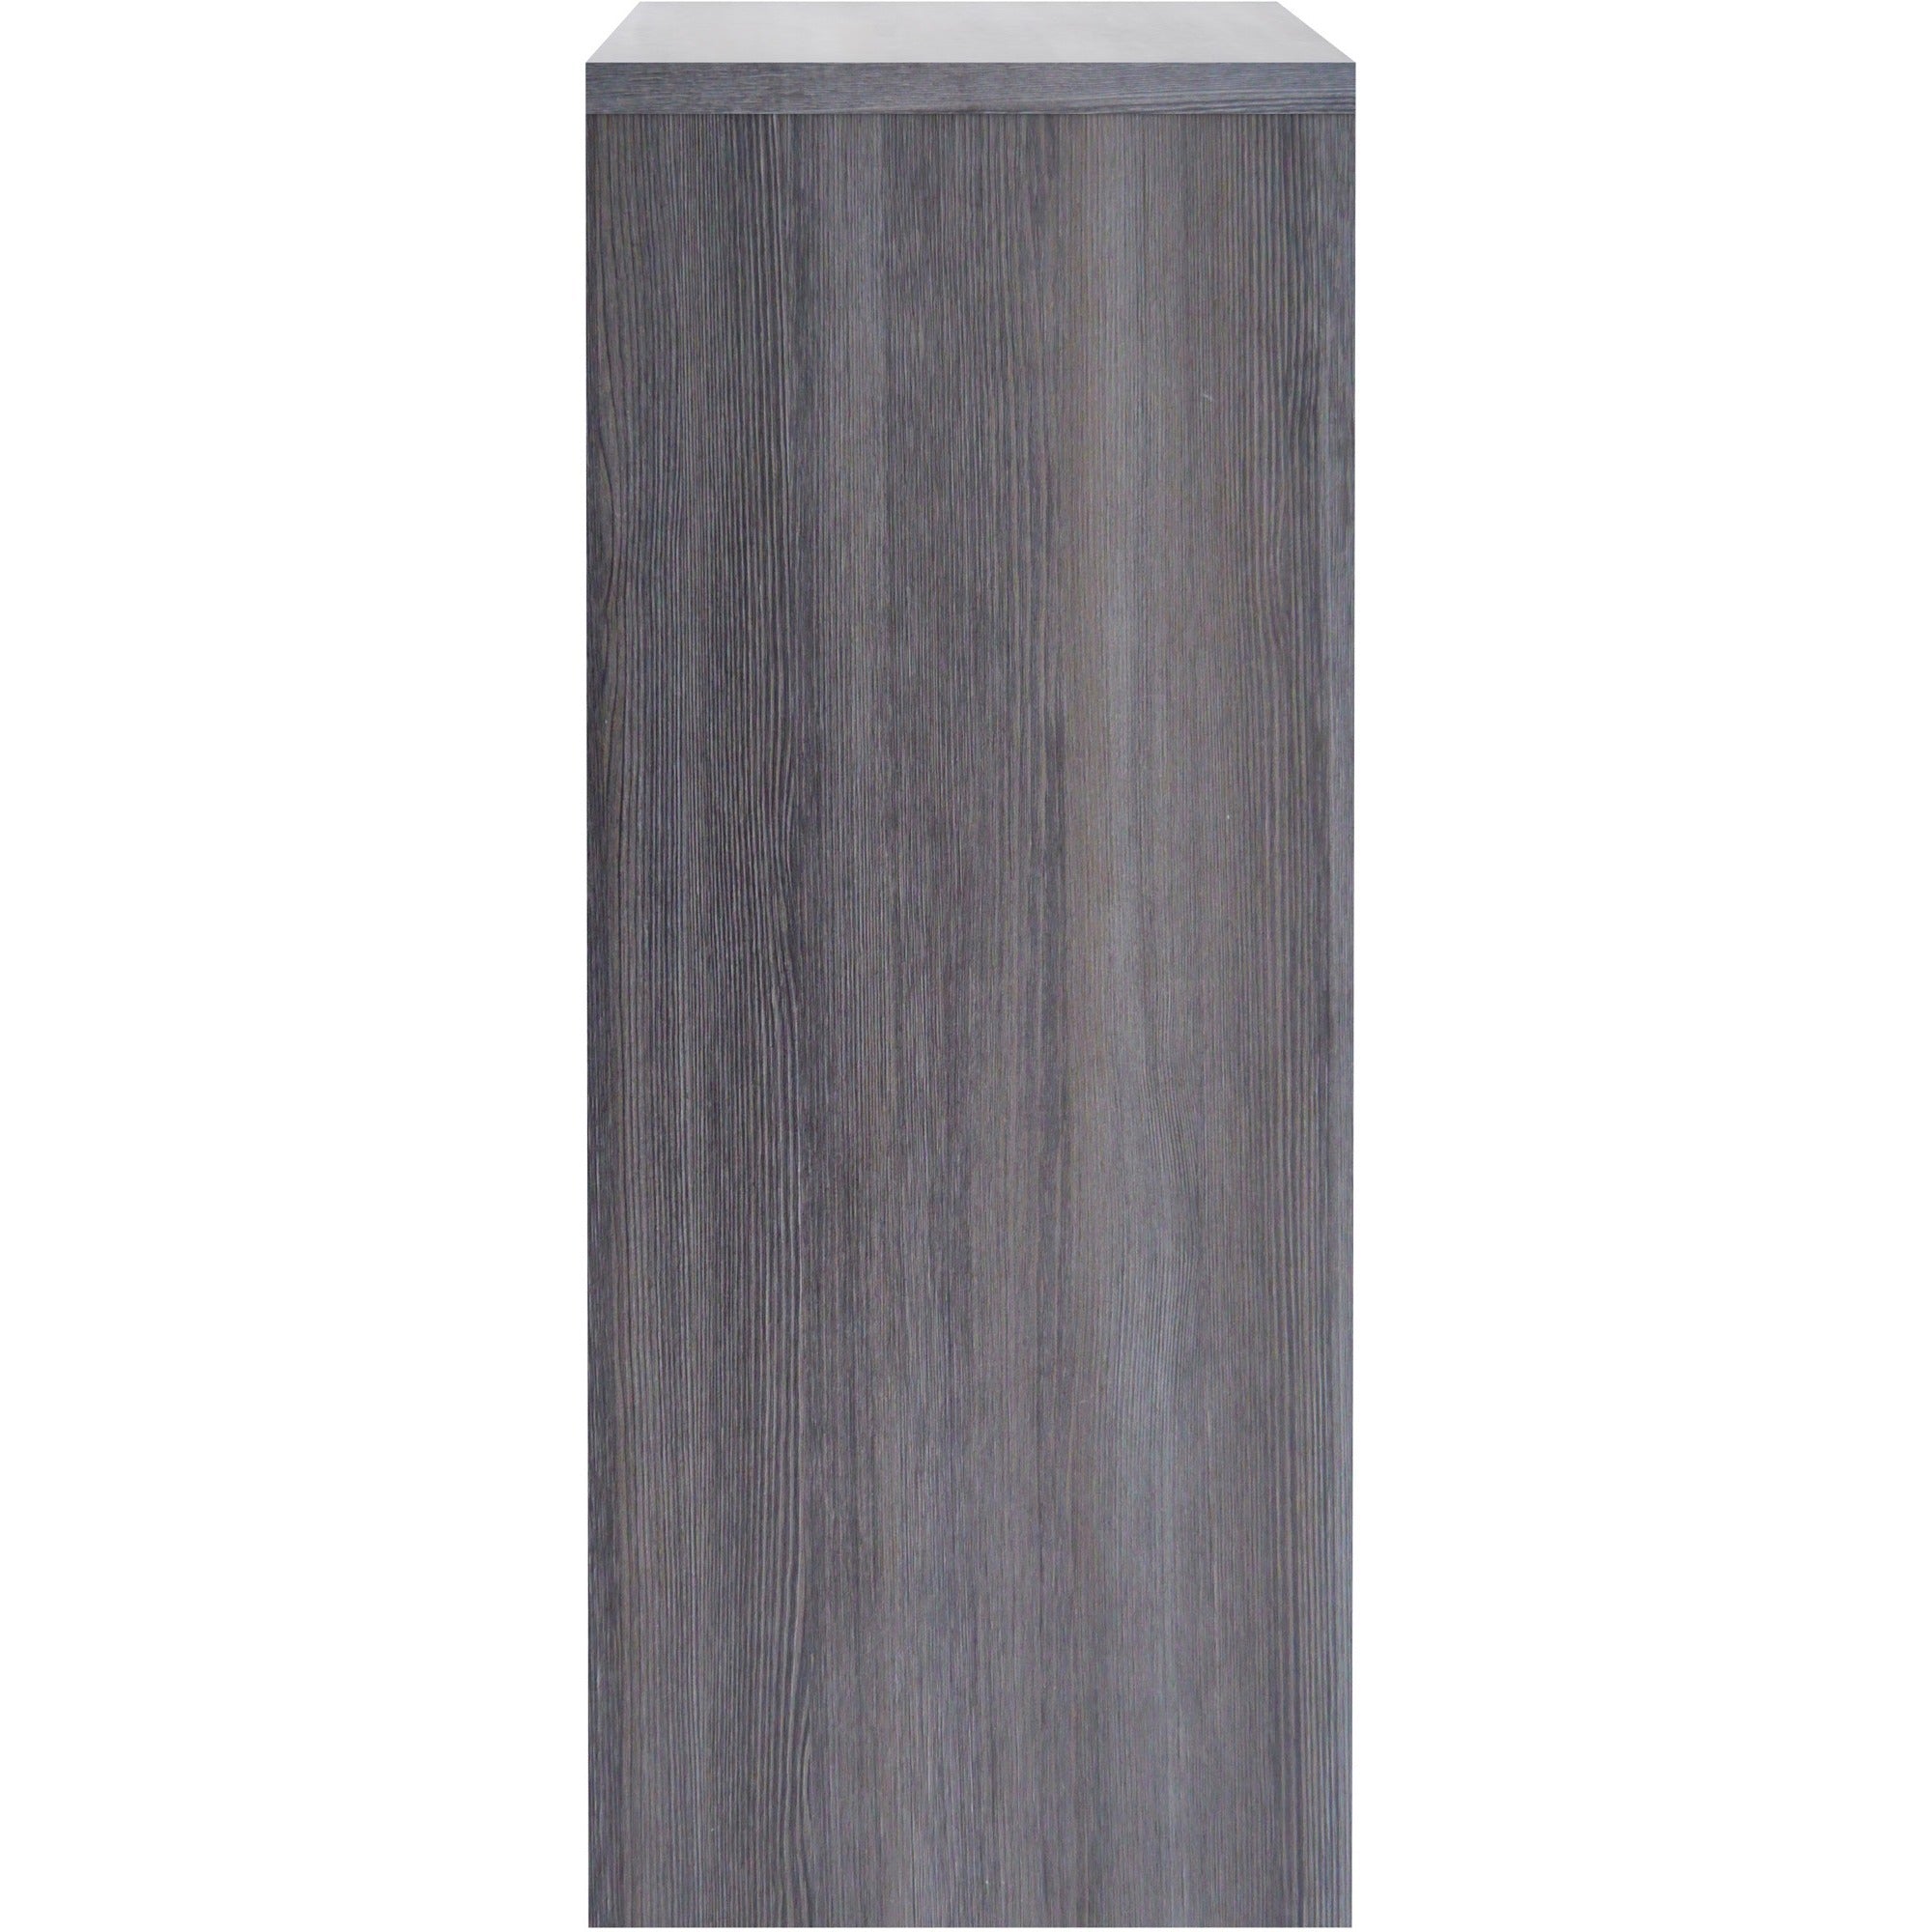 lorell-essentials-series-stack-on-hutch-with-doors-66-x-1536-4-doors-finish-weathered-charcoal-laminate_llr69619 - 4